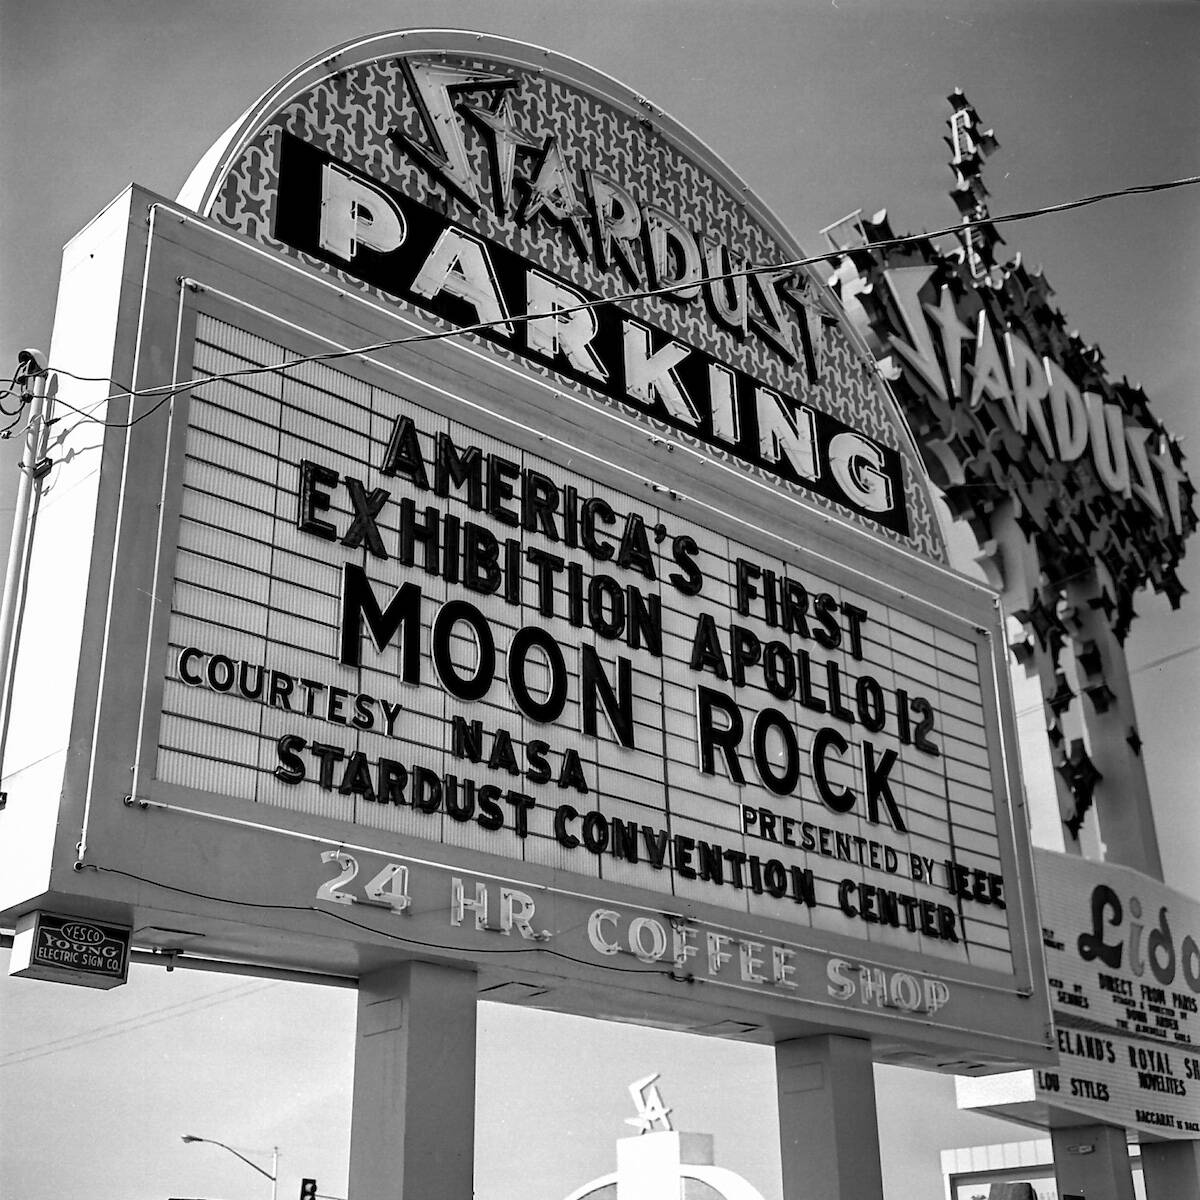 Moon rocks from the Apollo 12 mission are highlighted on the Stardust marquee on April 8, 1970. ...